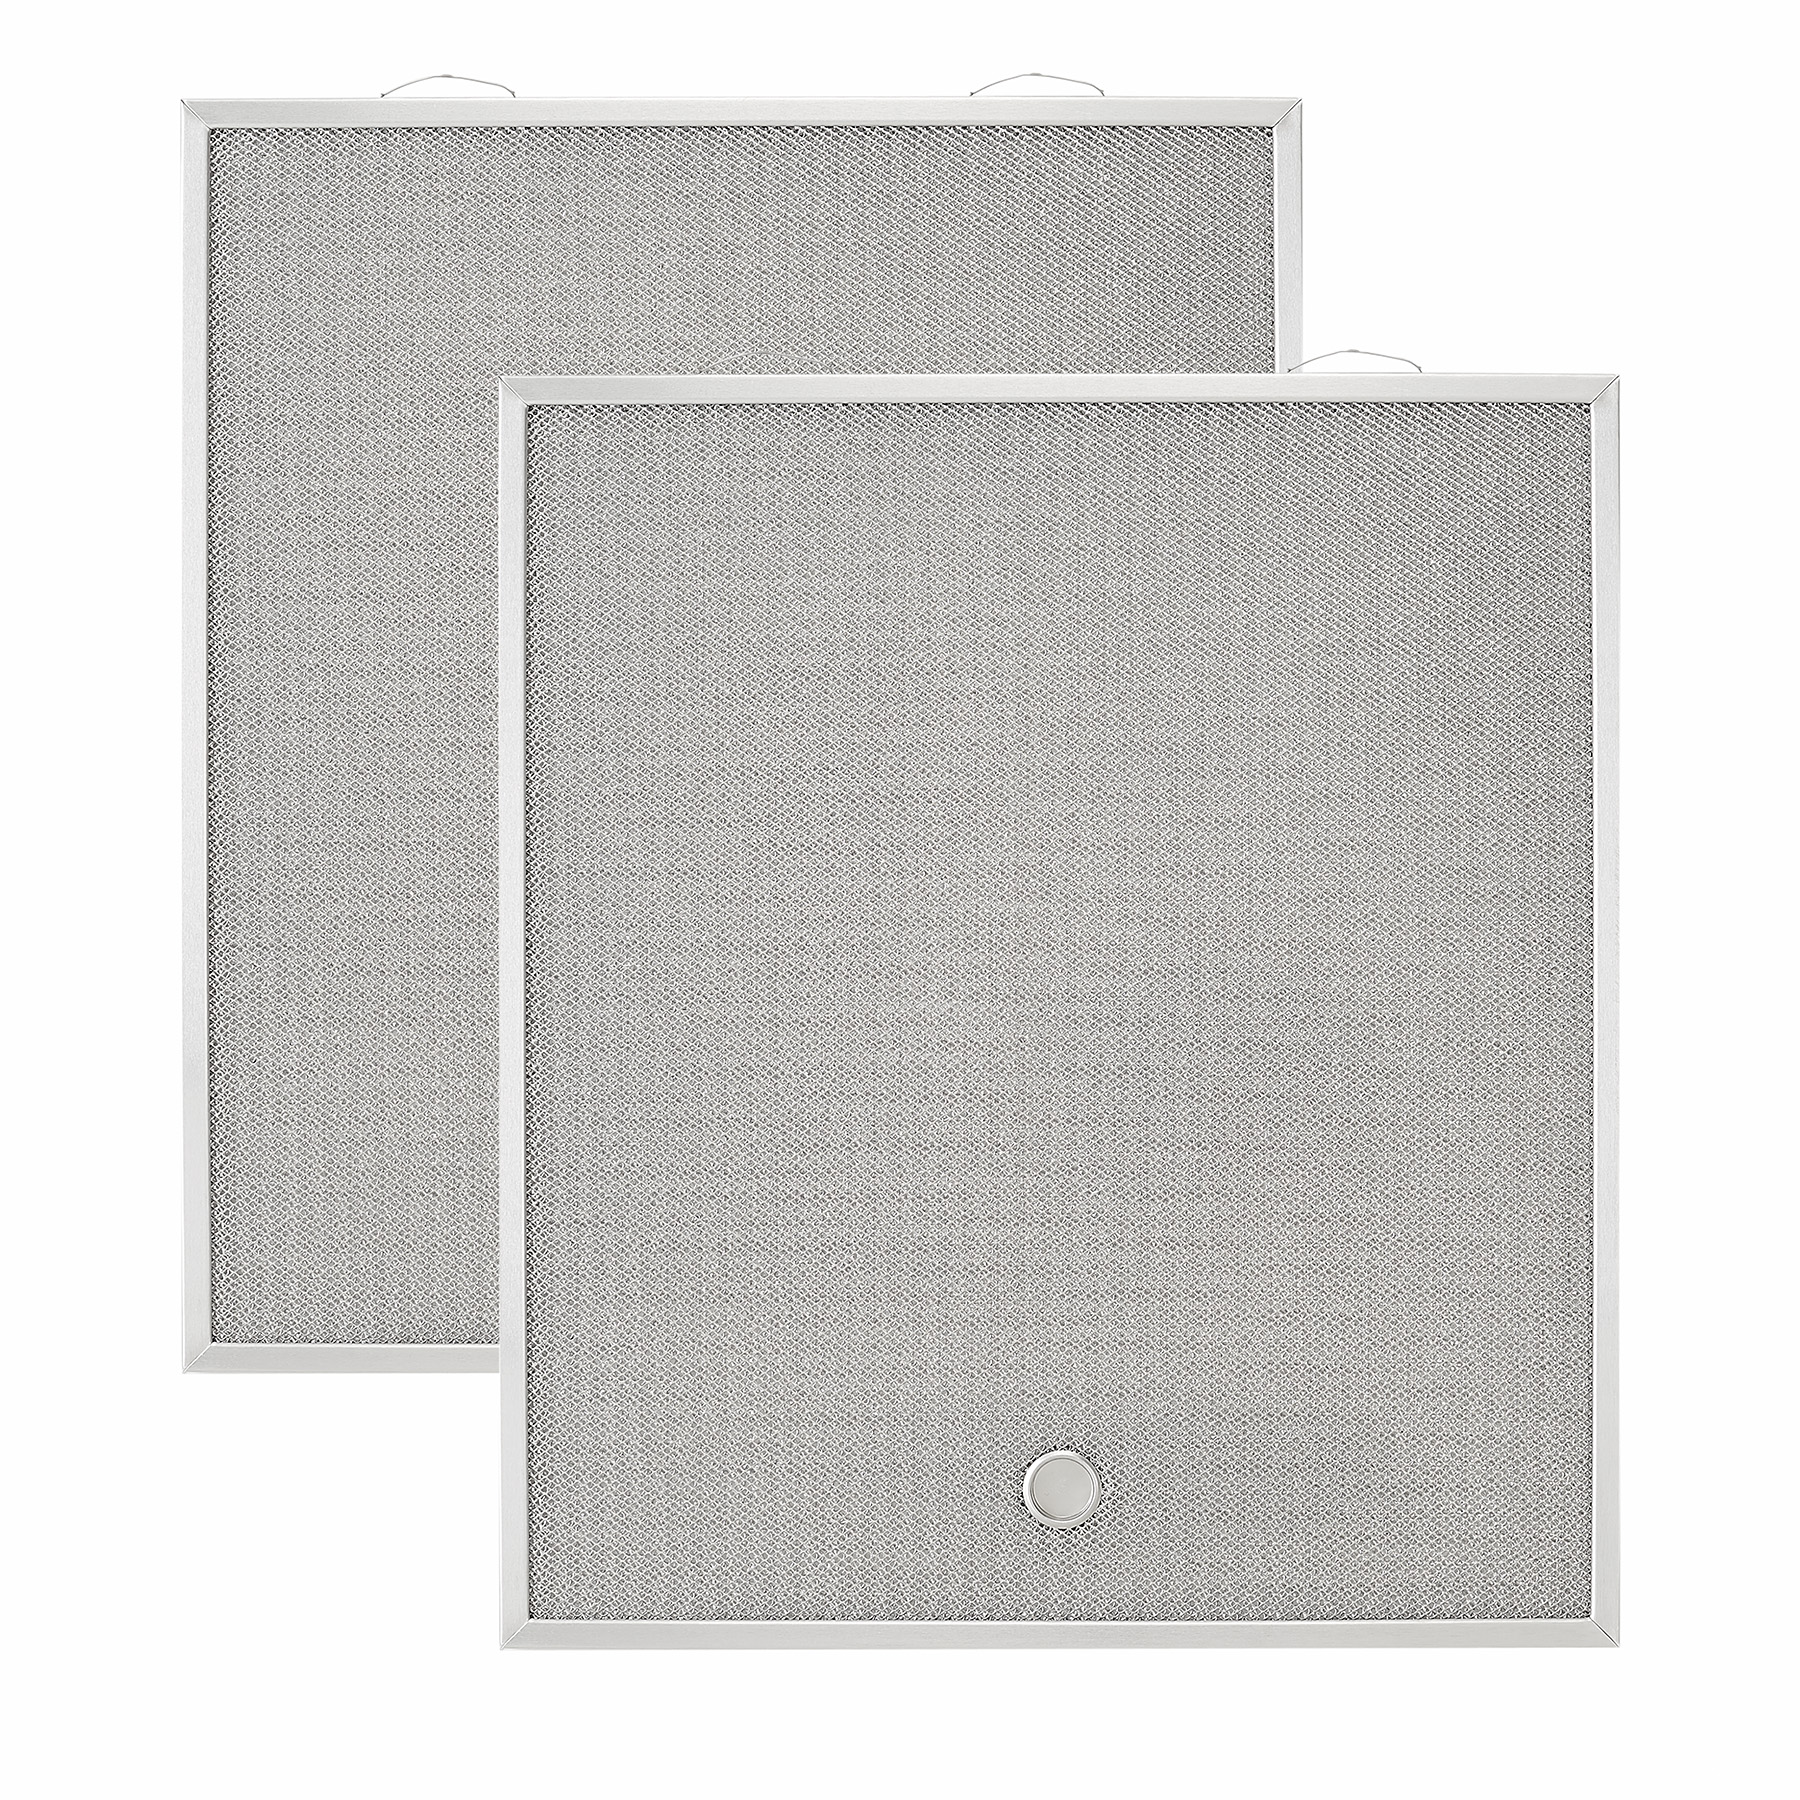 HPFAMM30 Replacement Micro Mesh Aluminum Grease Filters (C2) for 30 in  Broan and NuTone Range Hoods (2-Pack)